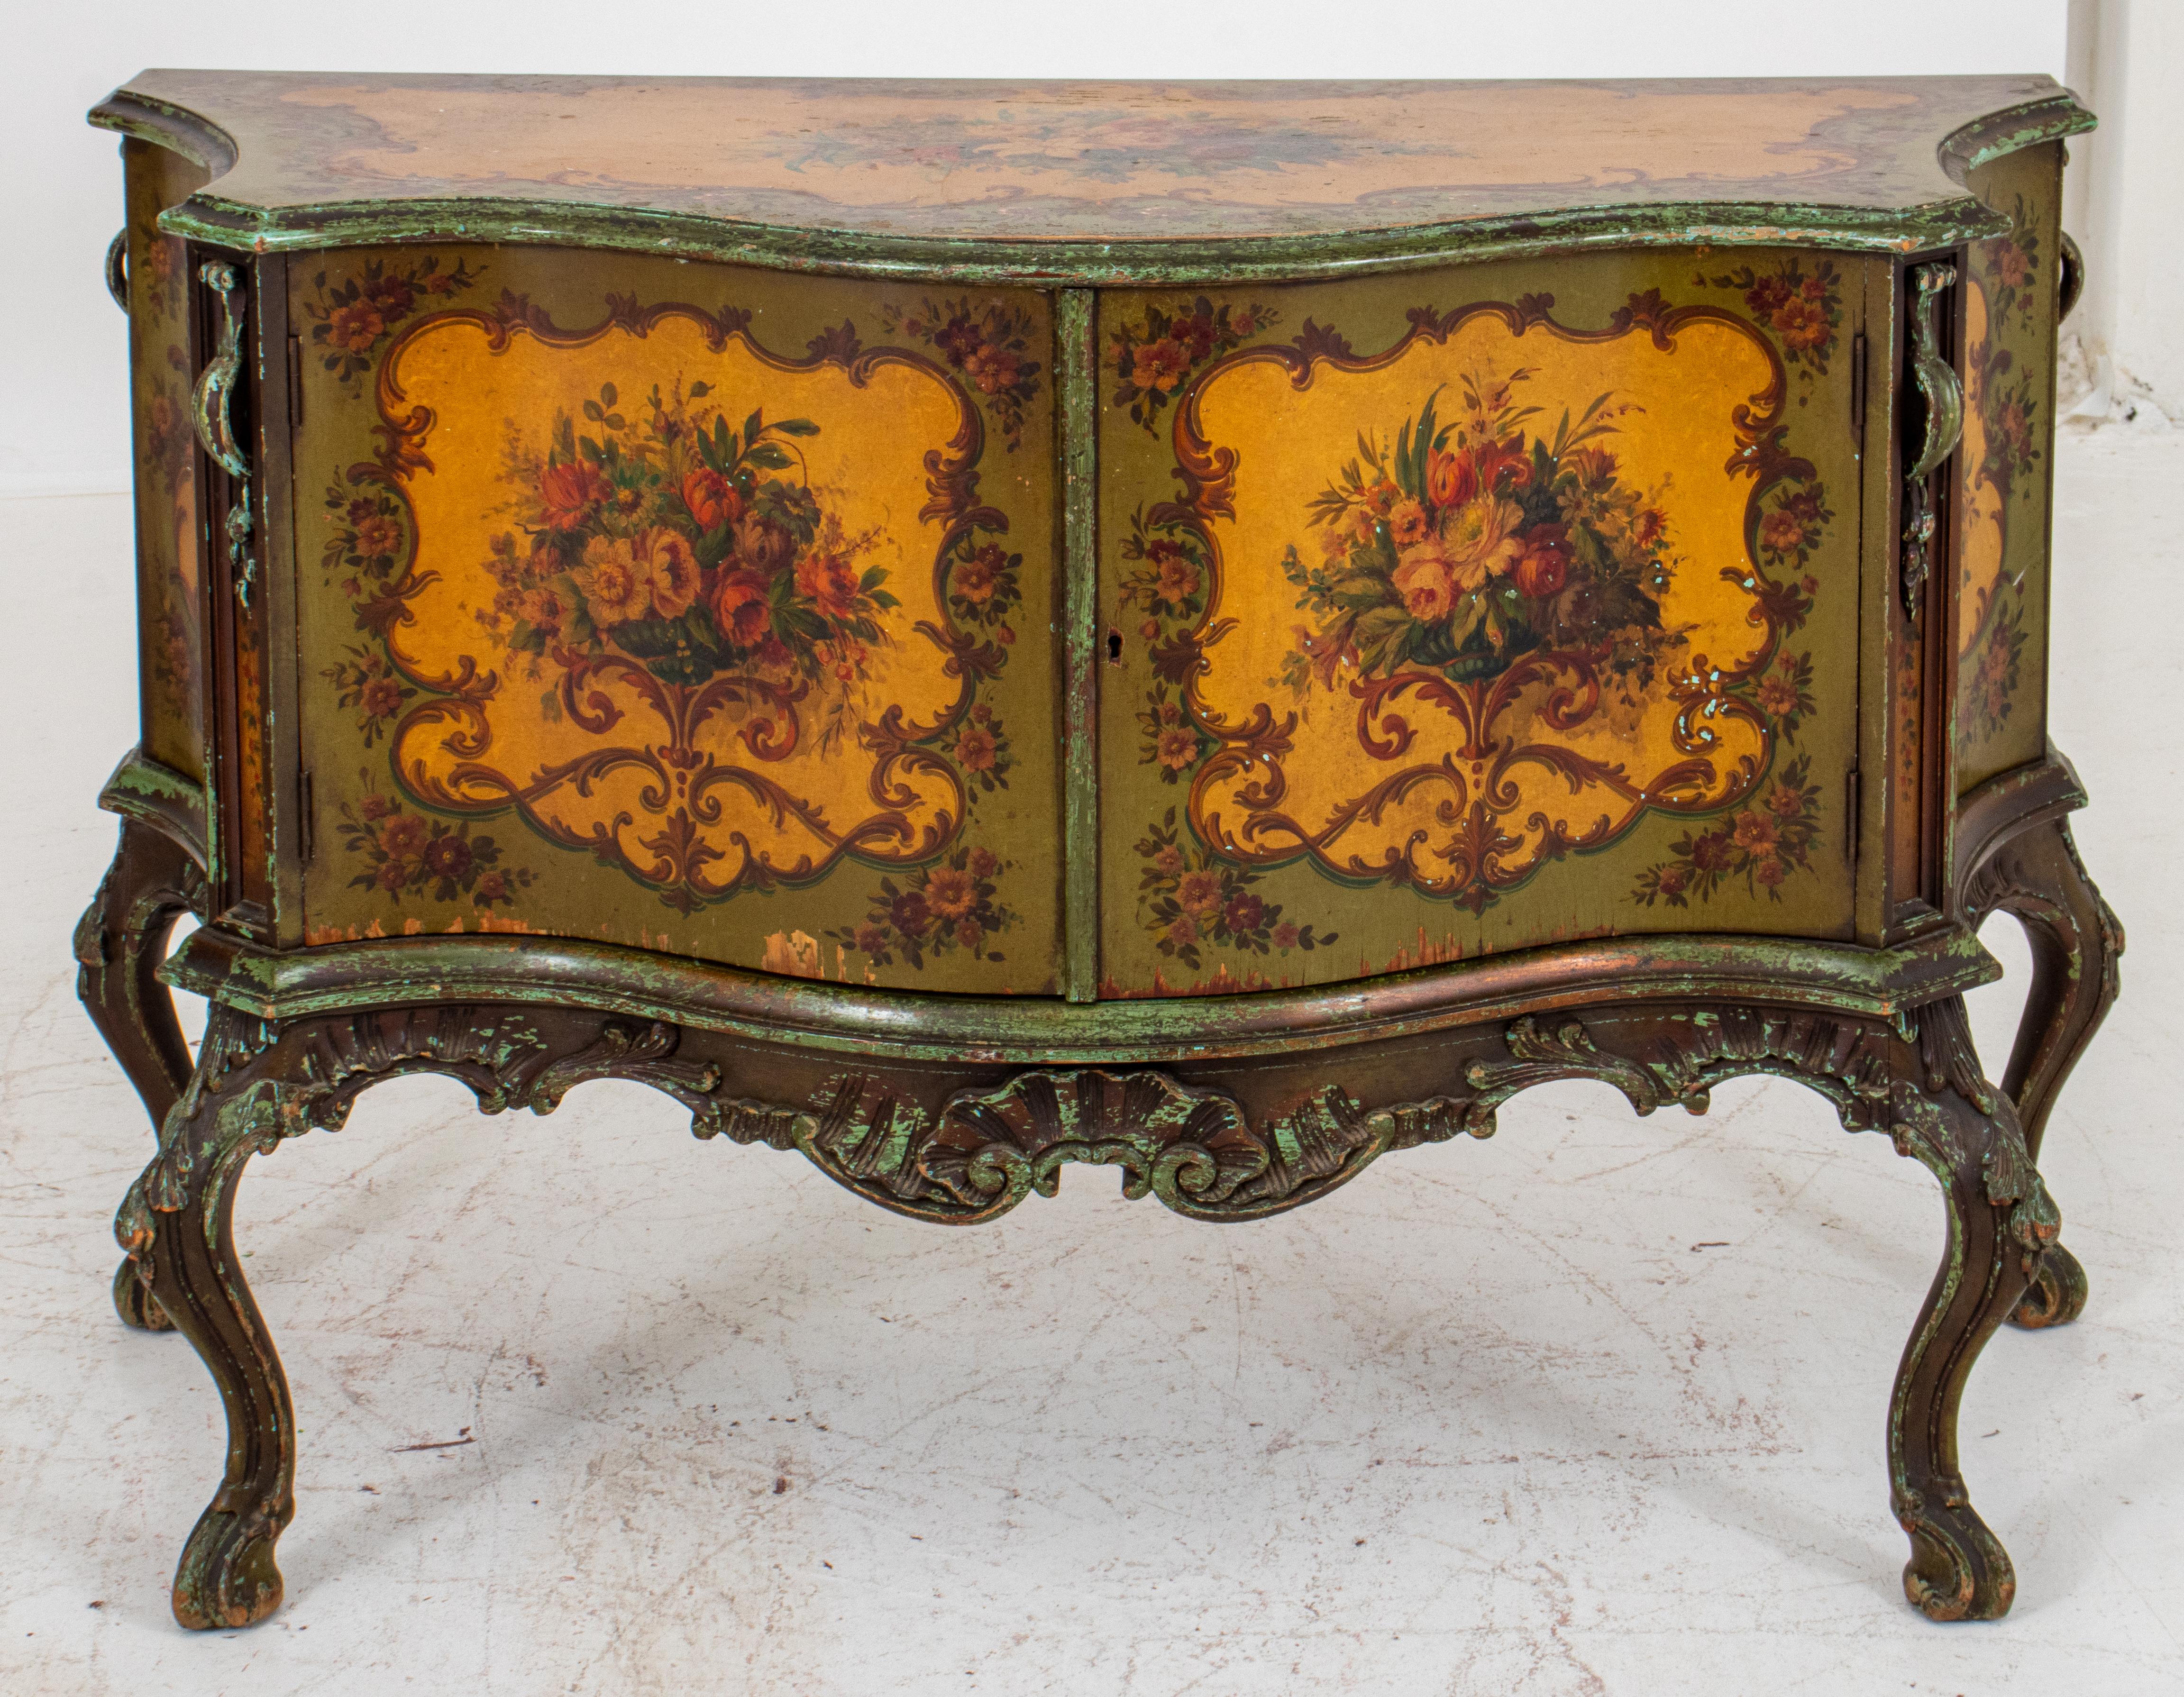 Venetian rococo revival 'lacca povera' commode, with painted floral panels, two shelf interior, carved cabriole legs, unmarked. 33.25